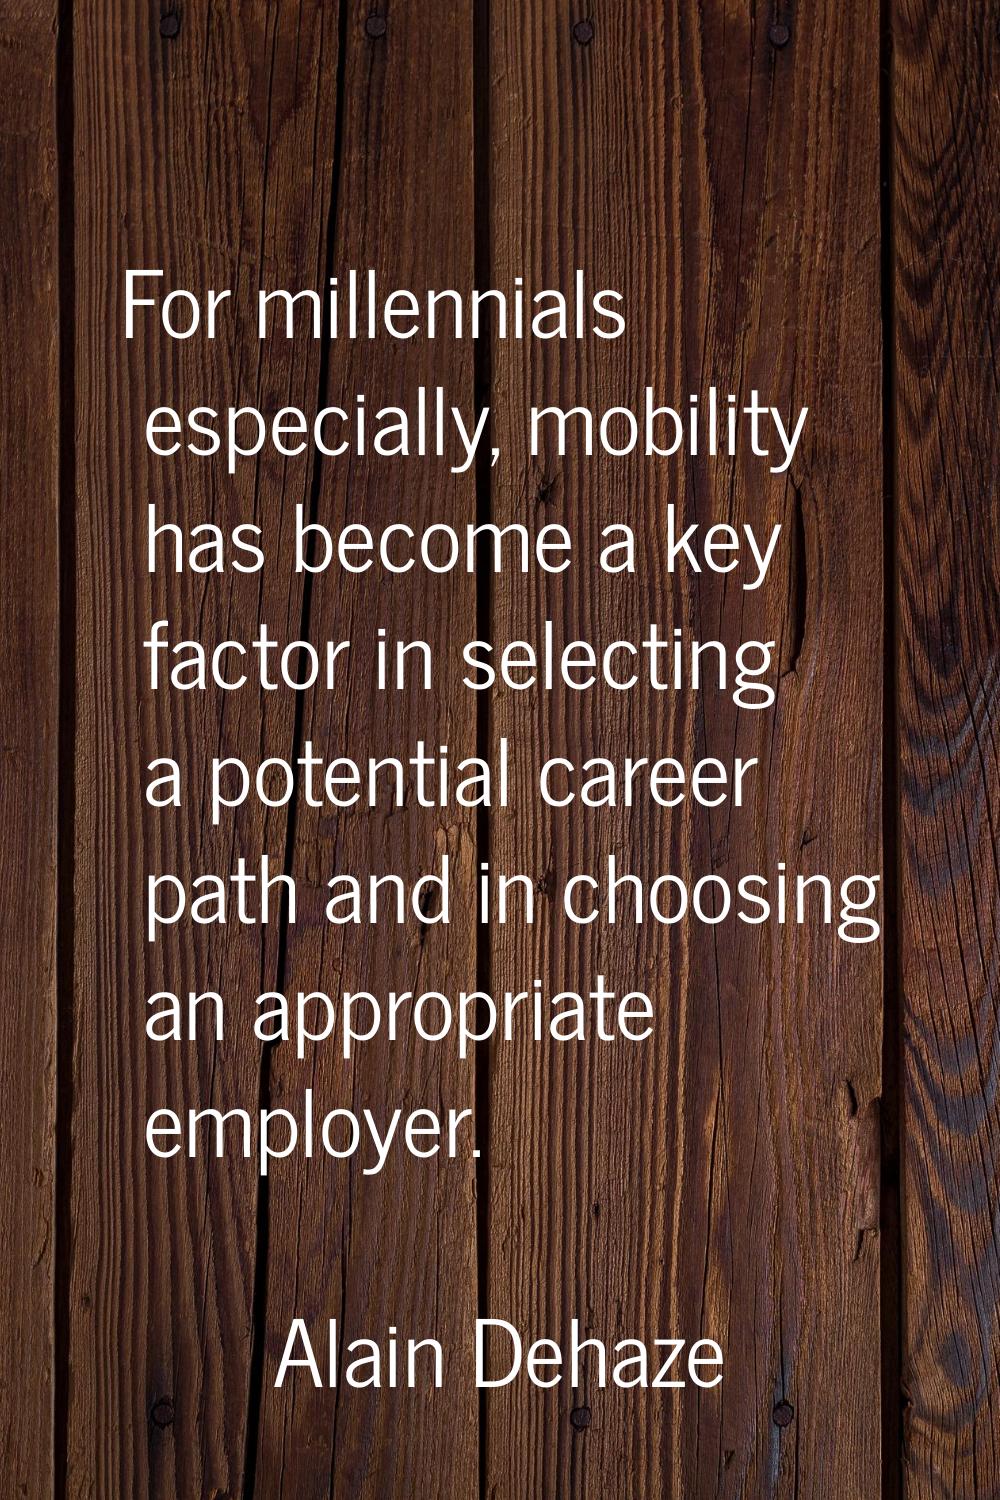 For millennials especially, mobility has become a key factor in selecting a potential career path a